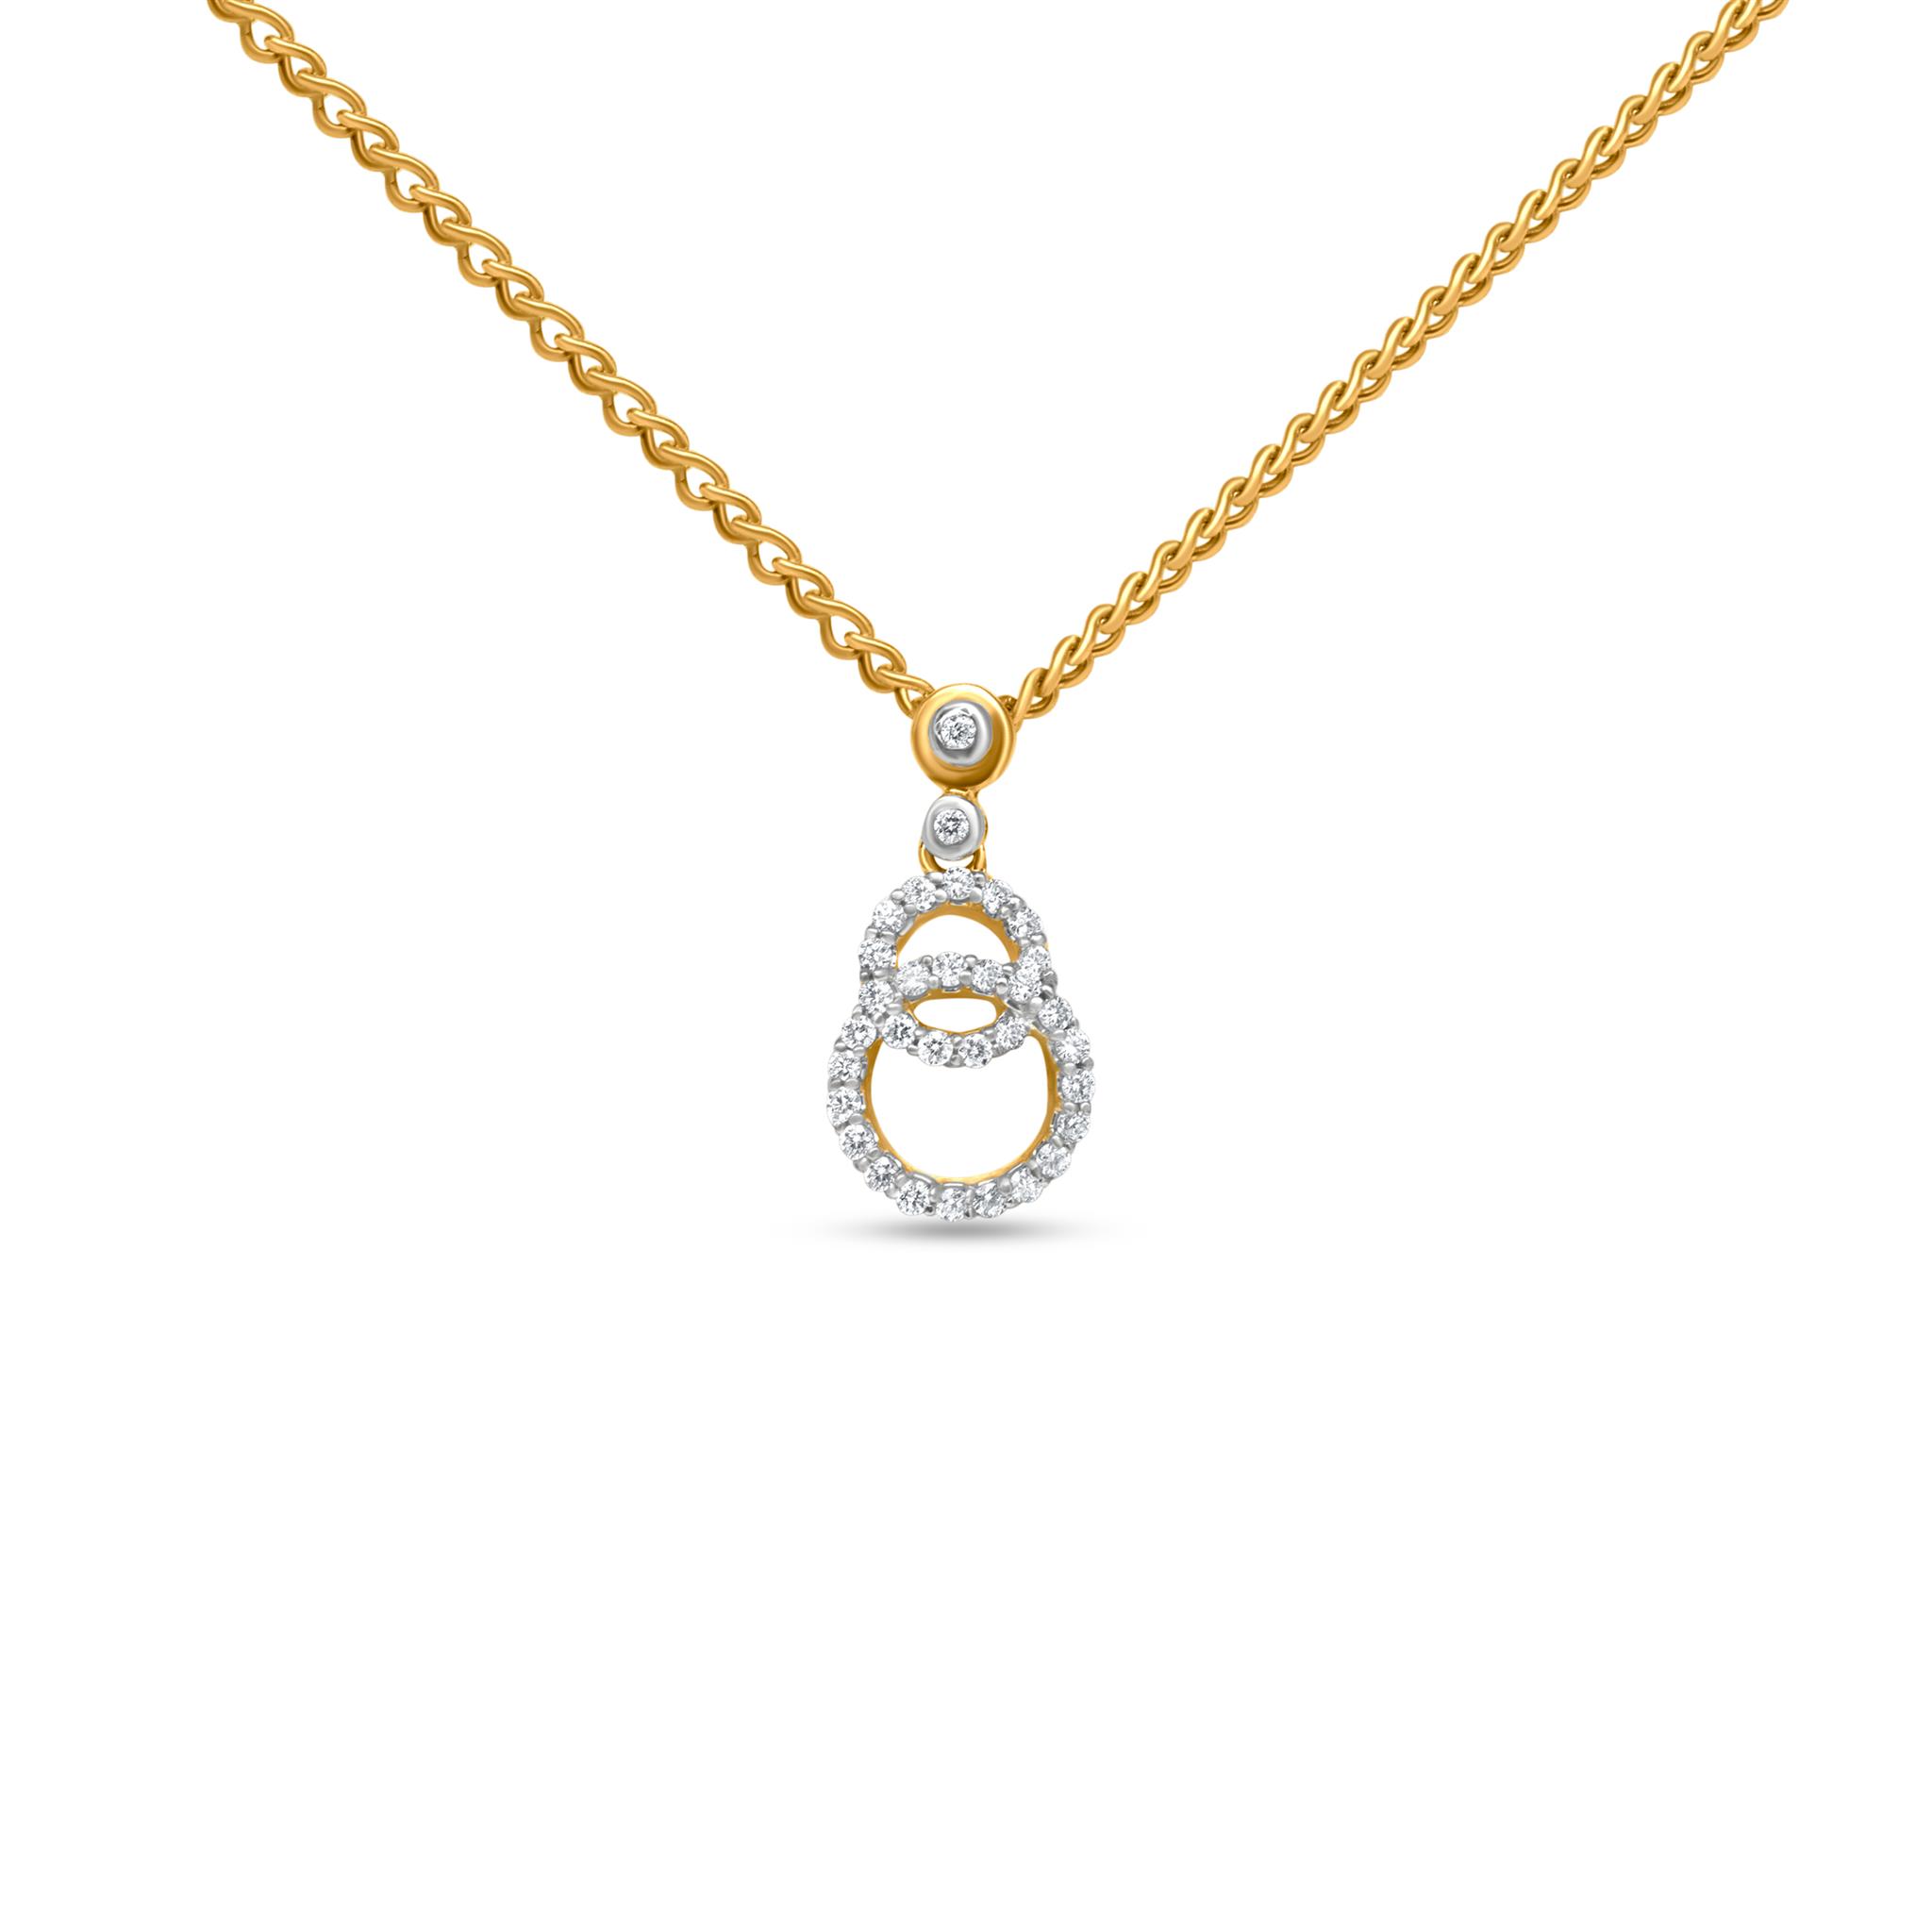 Bloomingdale's Diamond Pendant Necklace in 14K Yellow Gold, 0.25 ct. t.w. -  100% Exclusive | Bloomingdale's